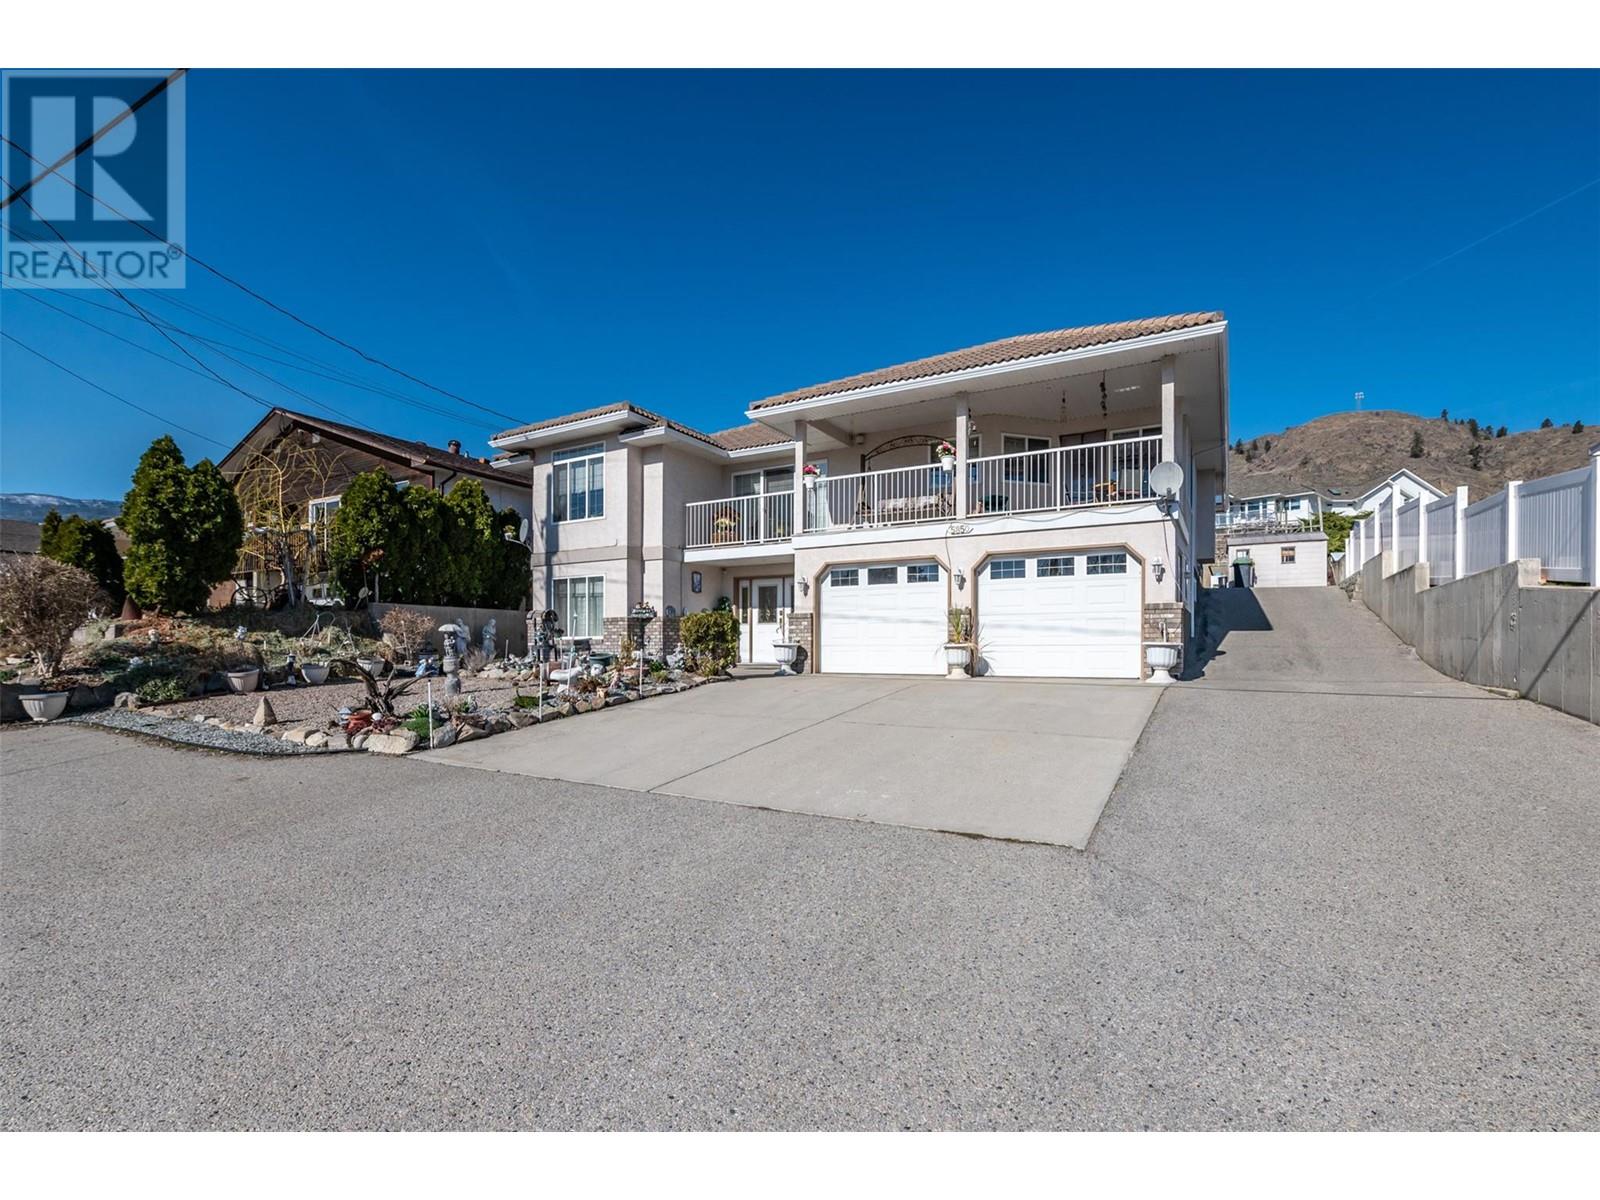 5850 Tulameen Street, Oliver, British Columbia  V0H 1T0 - Photo 1 - 10308040